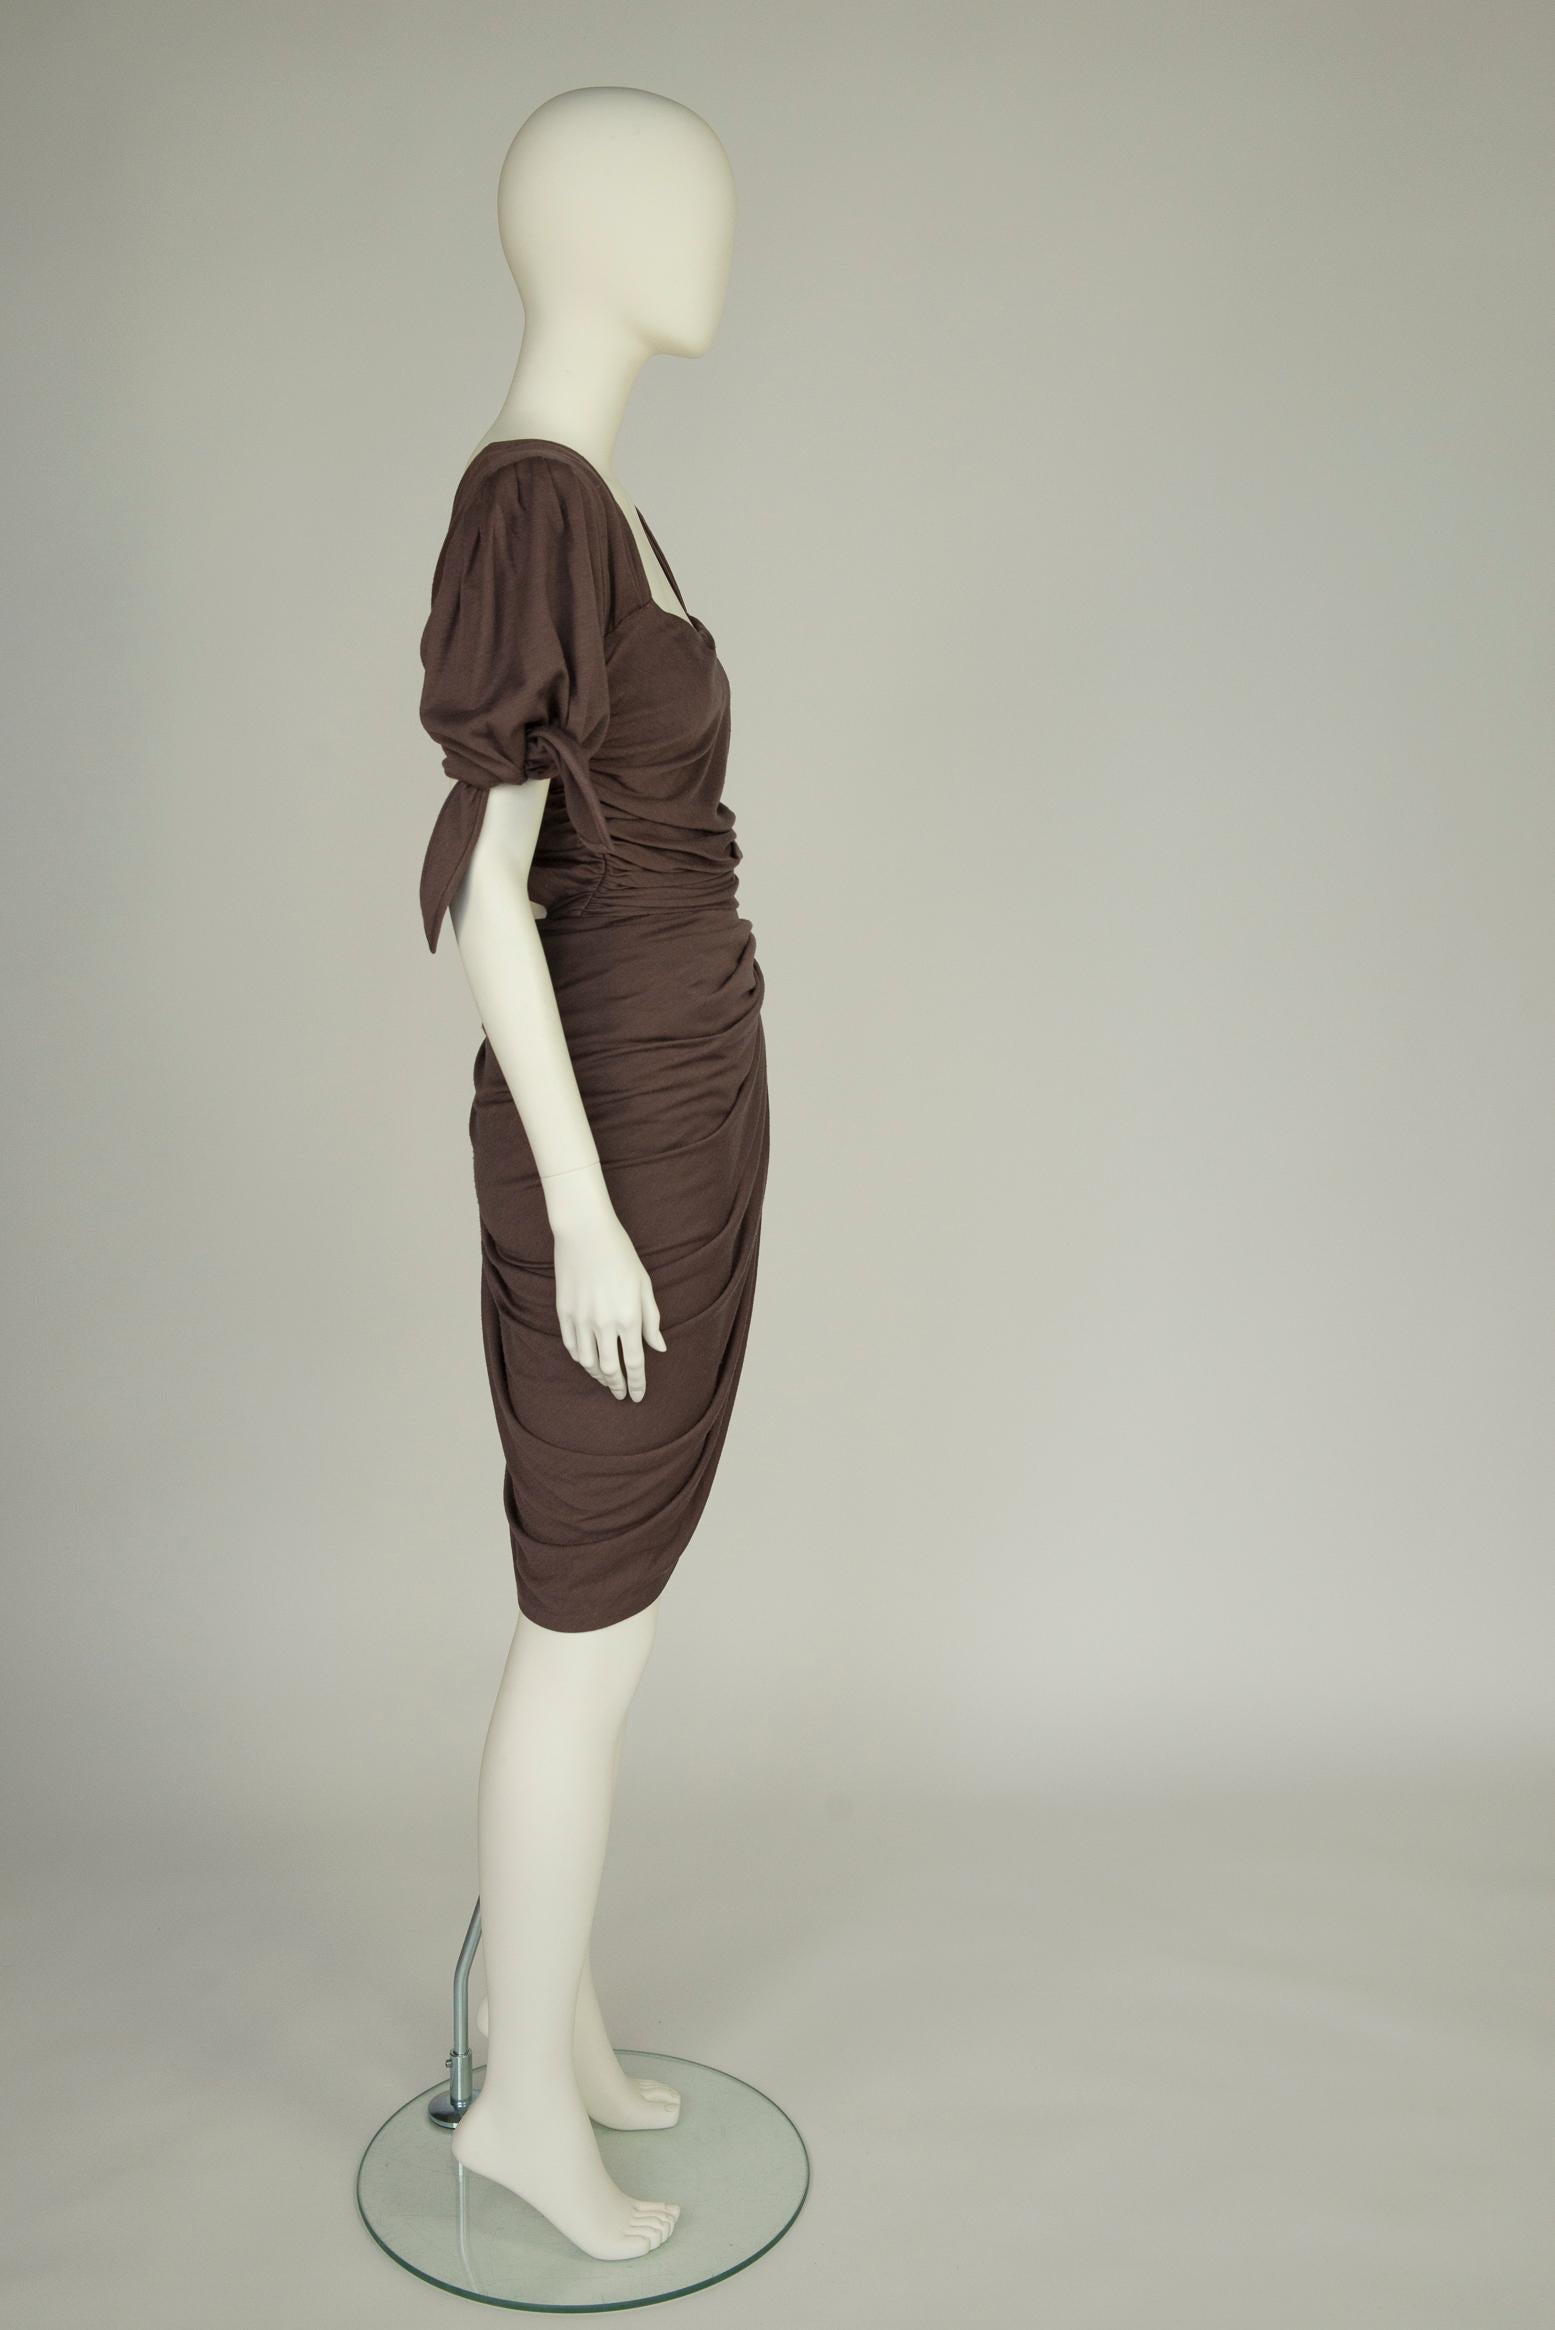 Emanuel Ungaro Draped Knotted Cut-Out Cocktail Dress, Circa 1985 For Sale 1